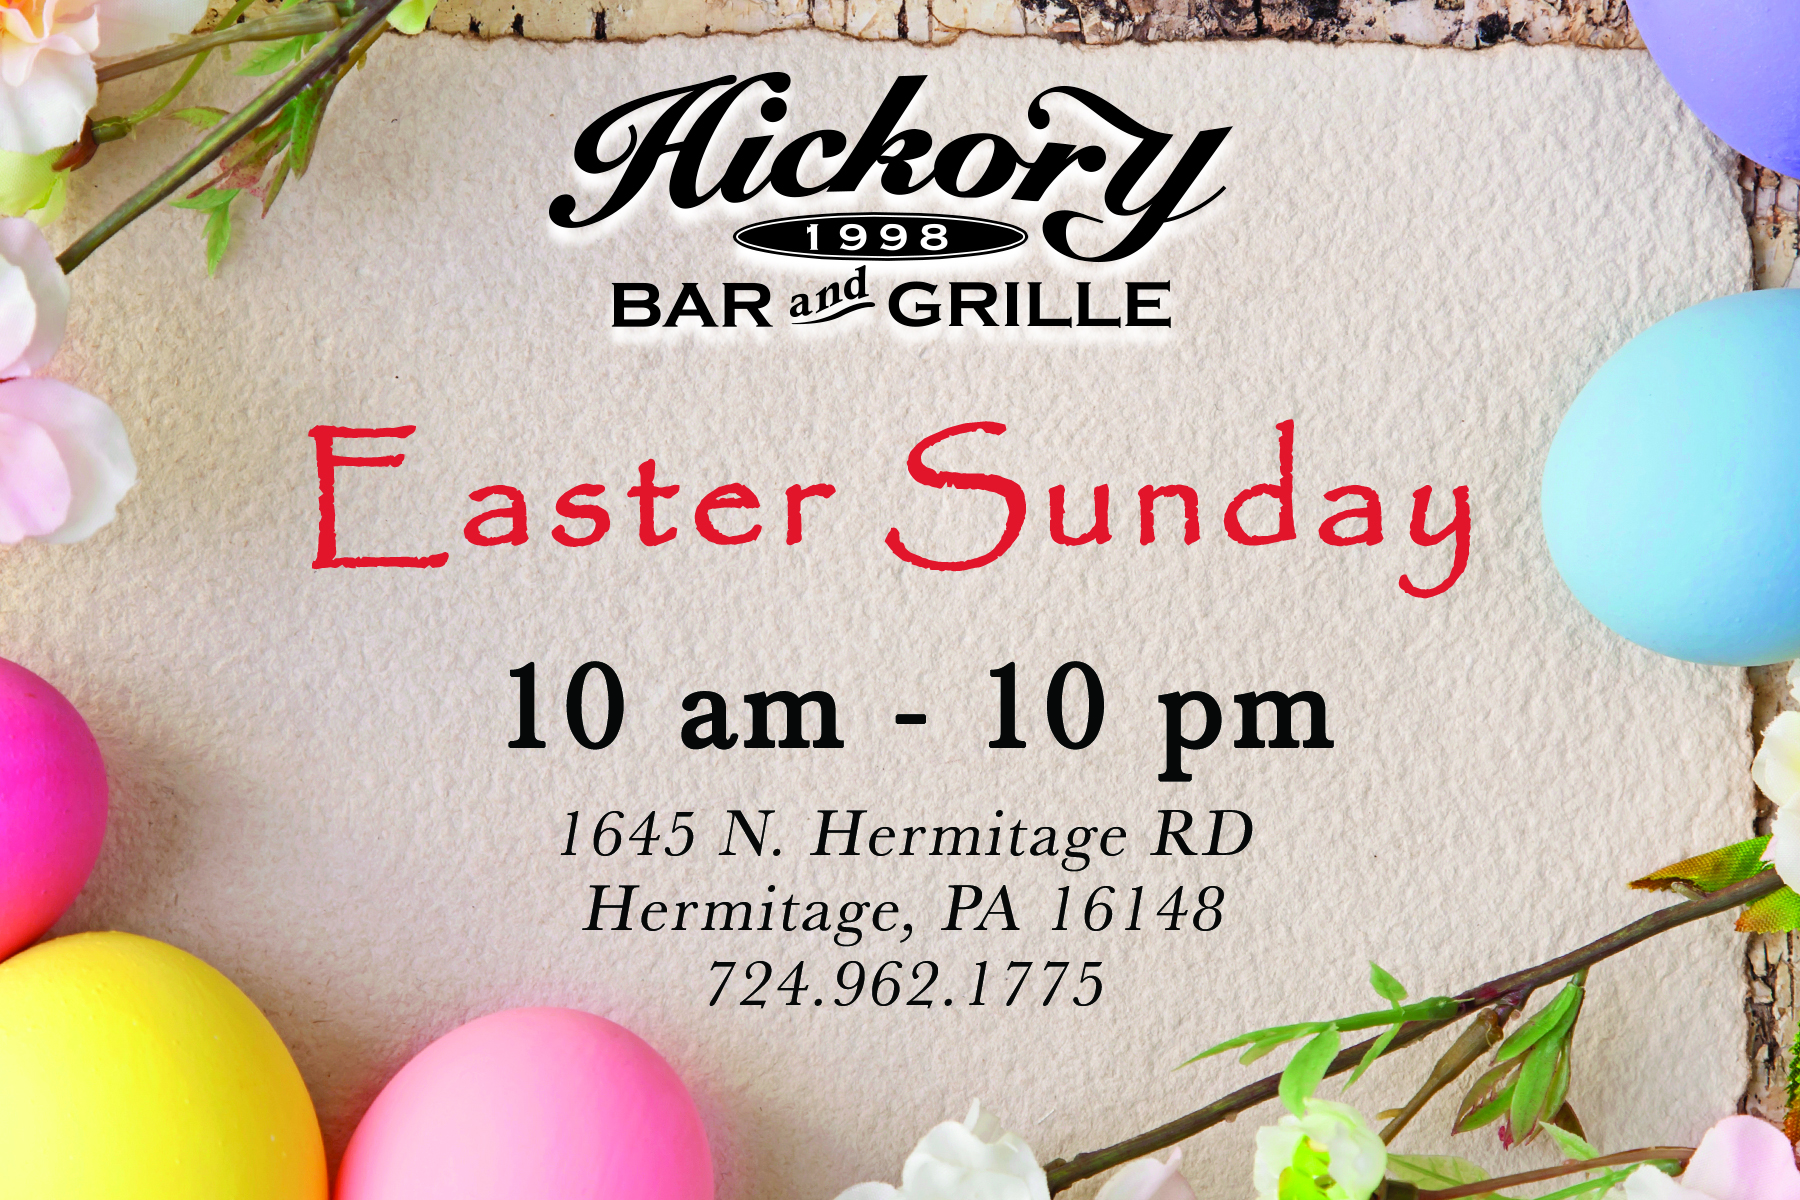 Sneak Peek at Easter Specials! - Hickory Bar & Grille - Hermitage, PA